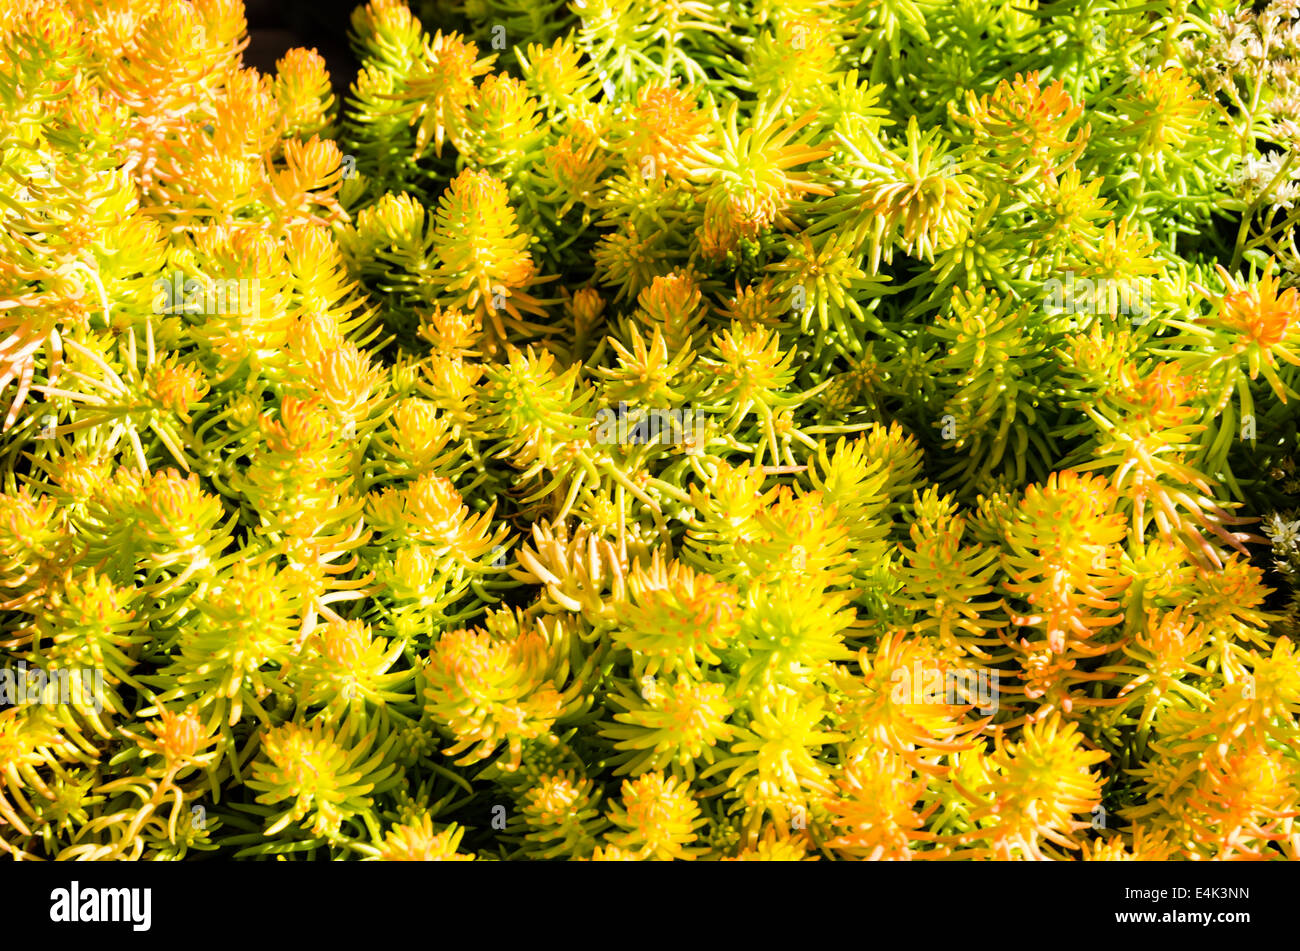 Sedum plants or sempervivum used for sustainable roof plantings Stock Photo